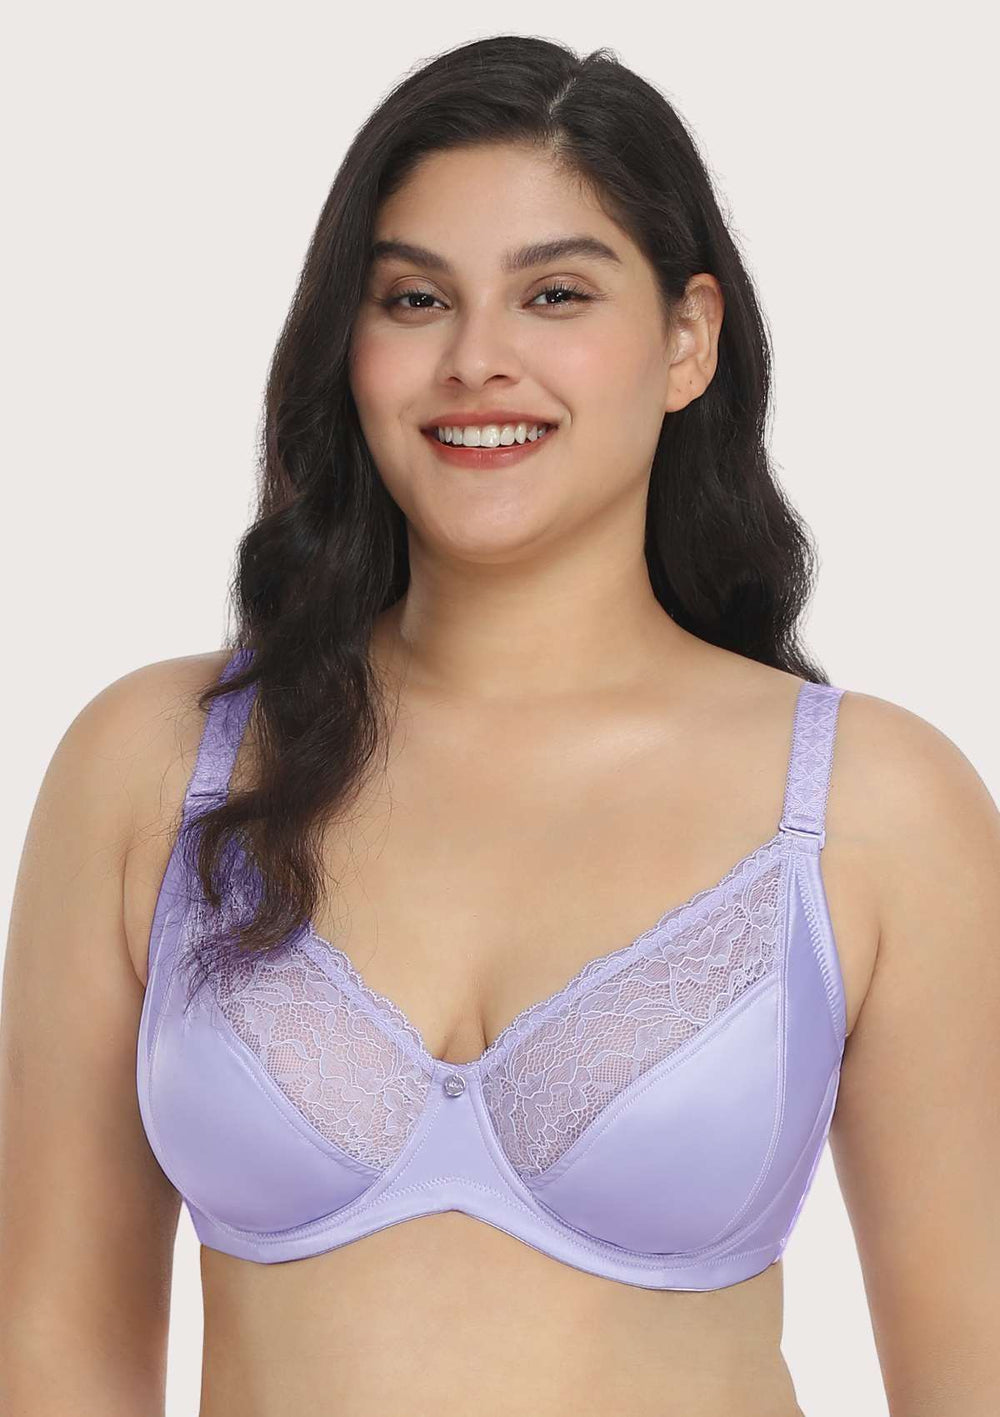 Whimsy by Lunaire Helenca Lace Underwire Bra 15911 Size 34DD Leotard Back